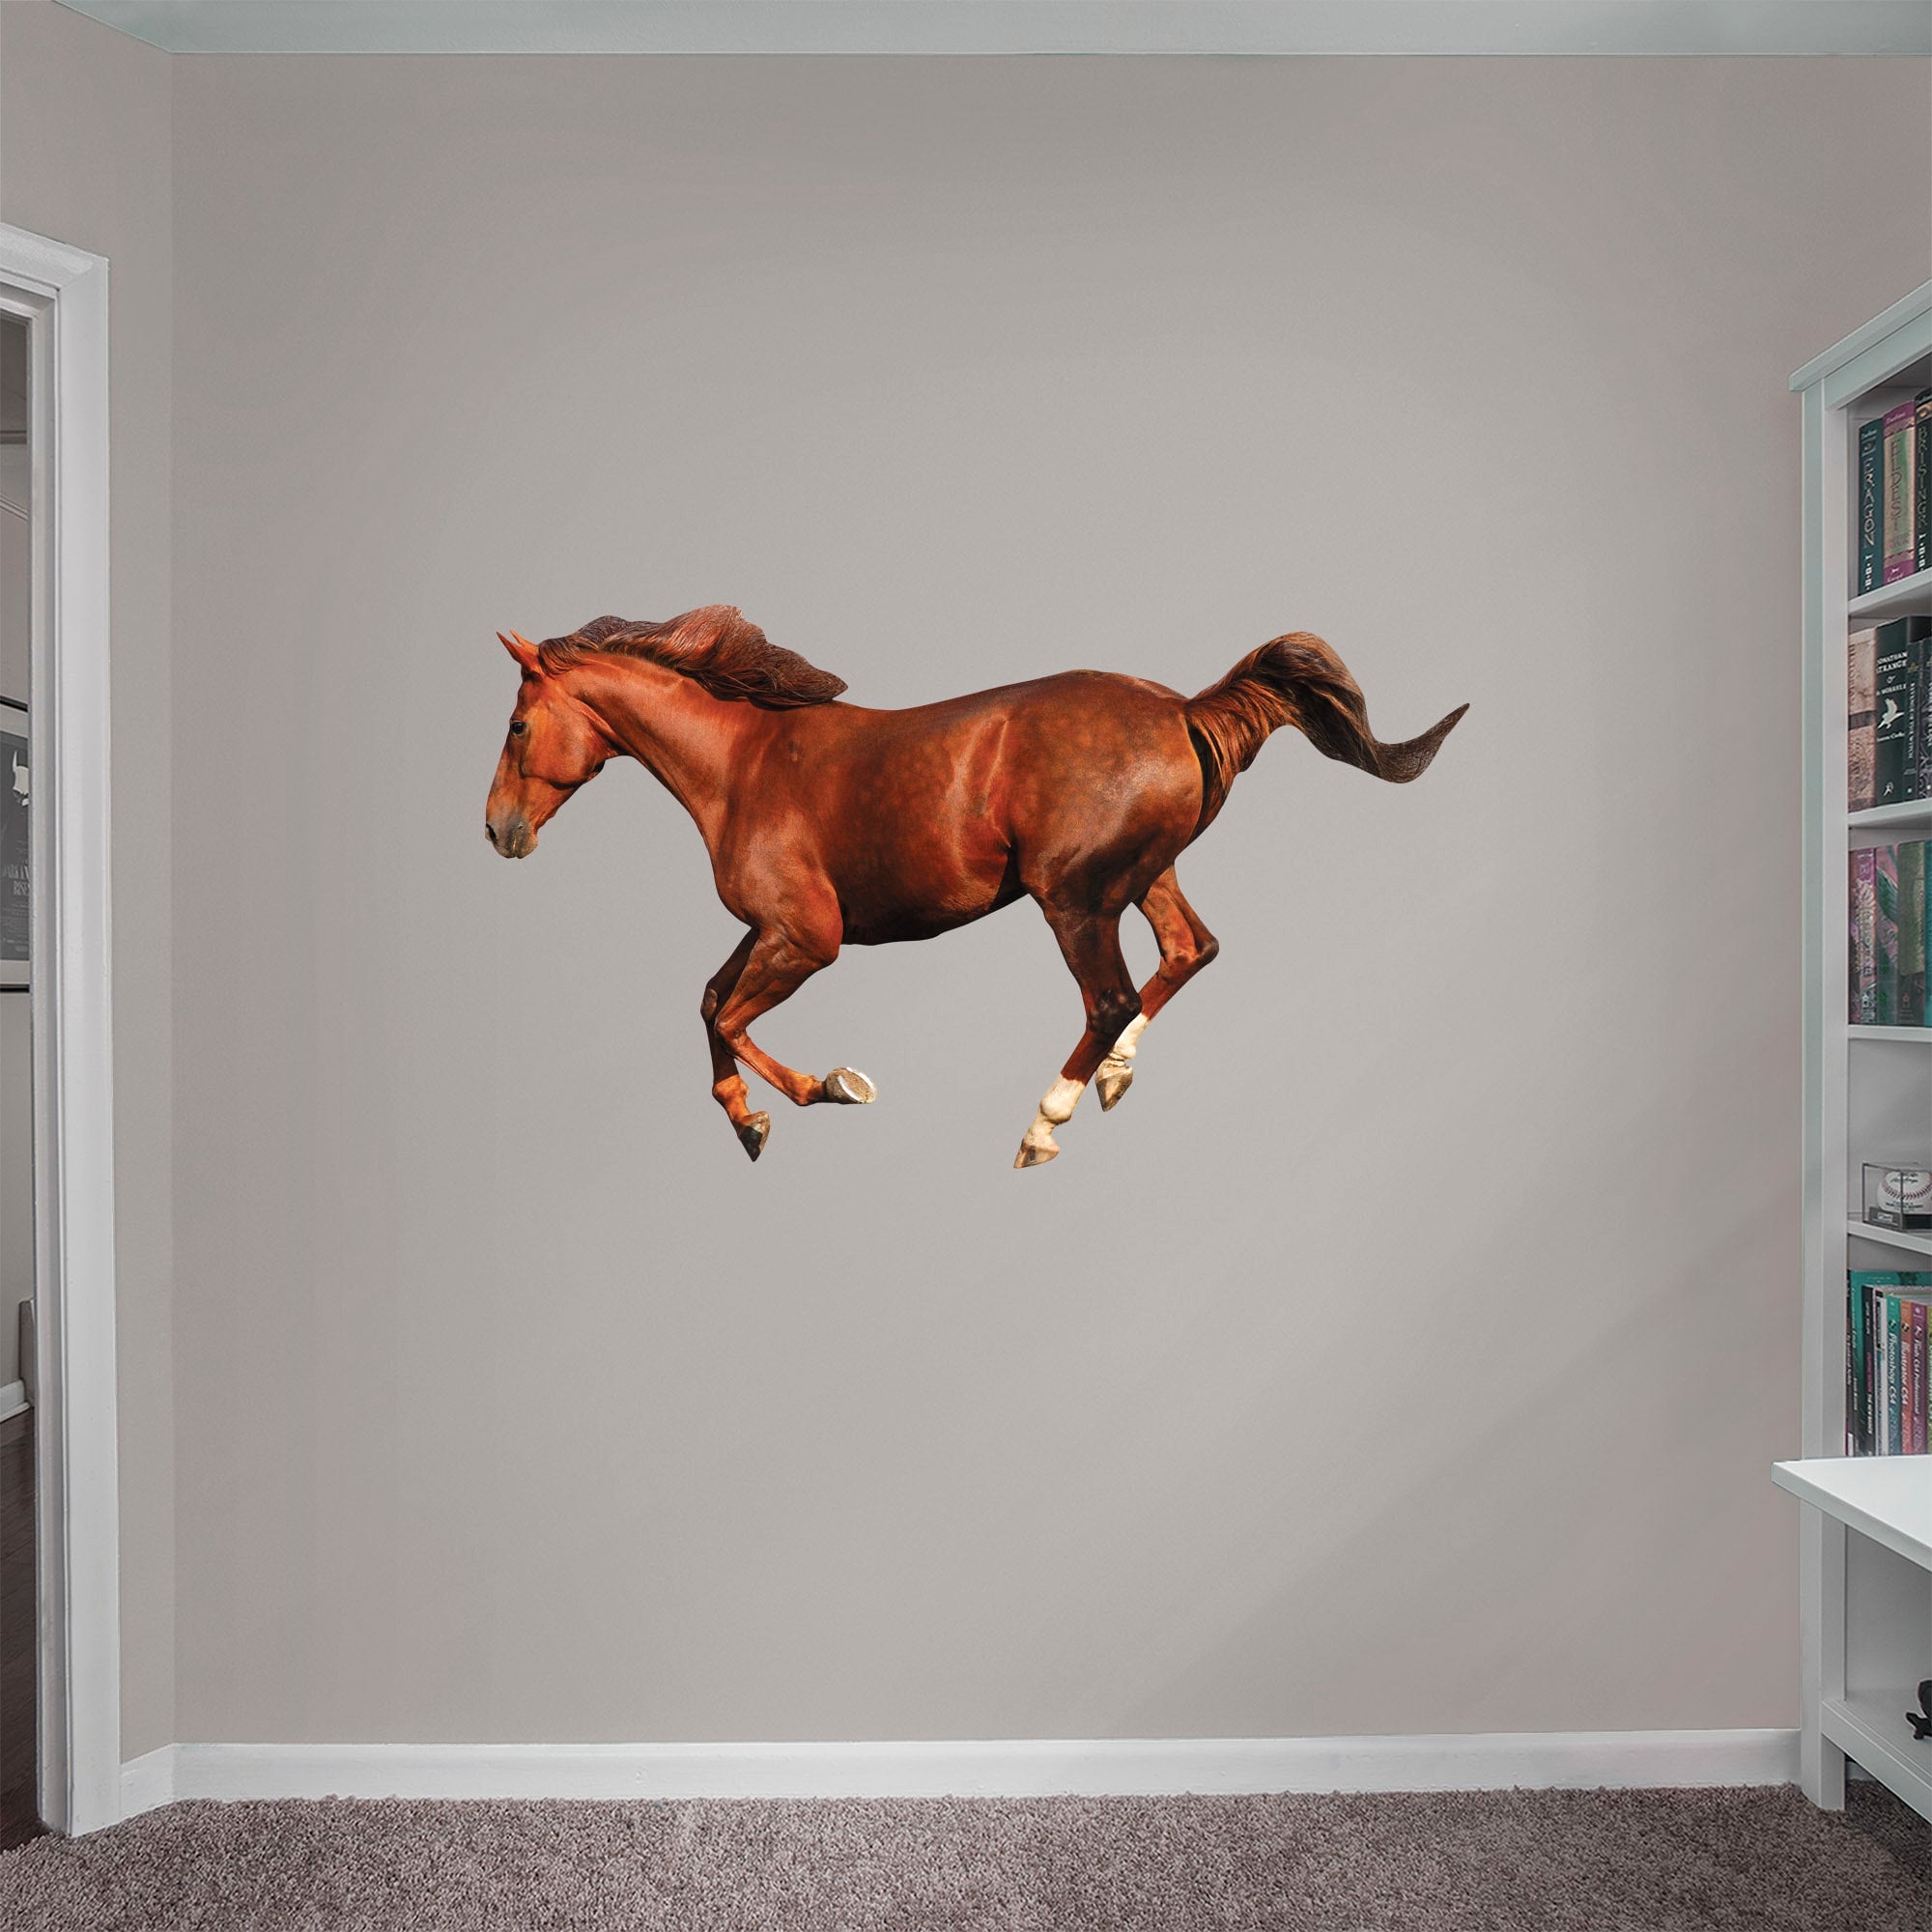 Horse - Removable Vinyl Decal Giant Animal + 2 Decals (51"W x 35"H) by Fathead